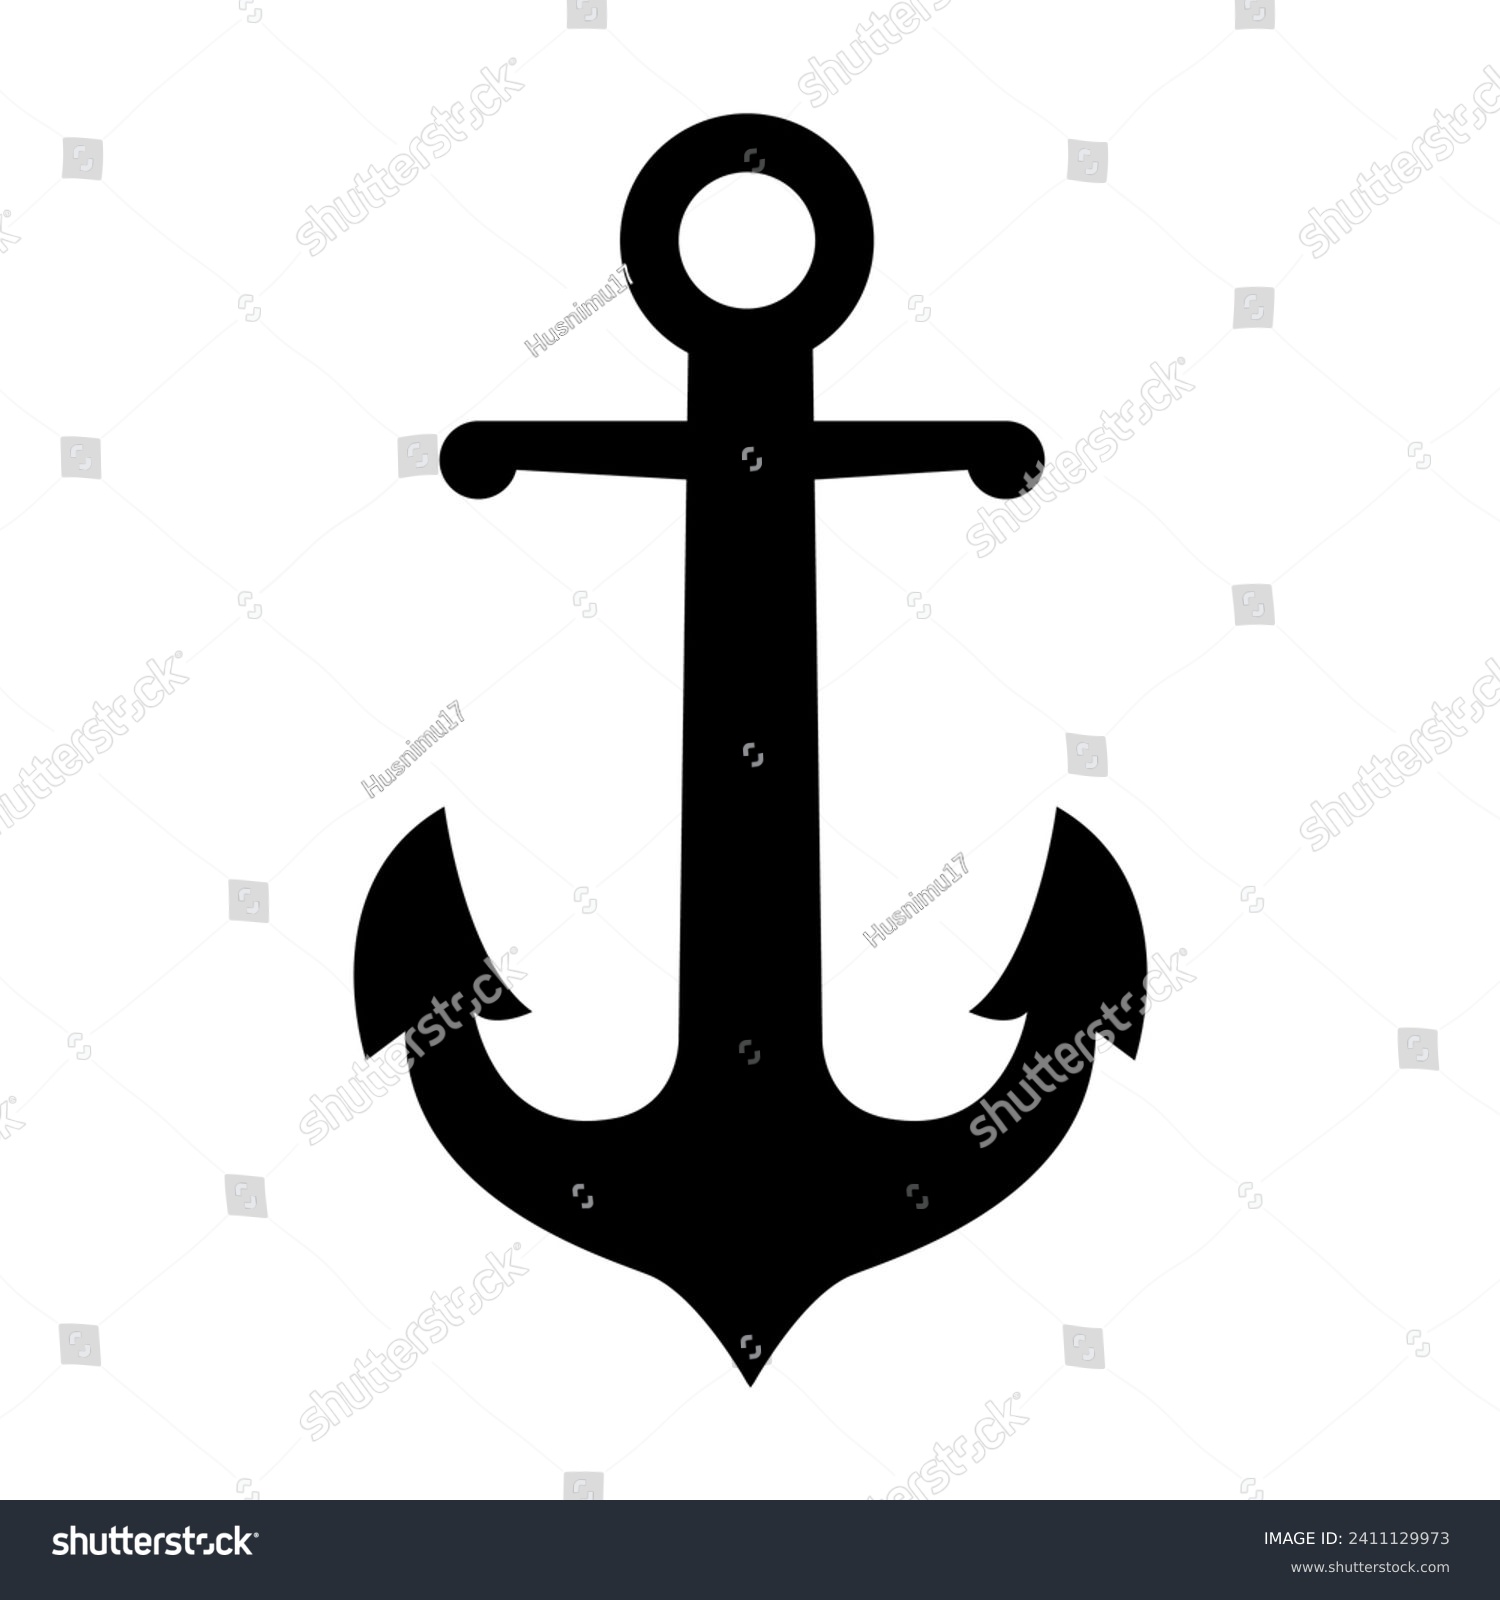 SVG of Anchor Nautical Vector Illustration isolated in white. svg